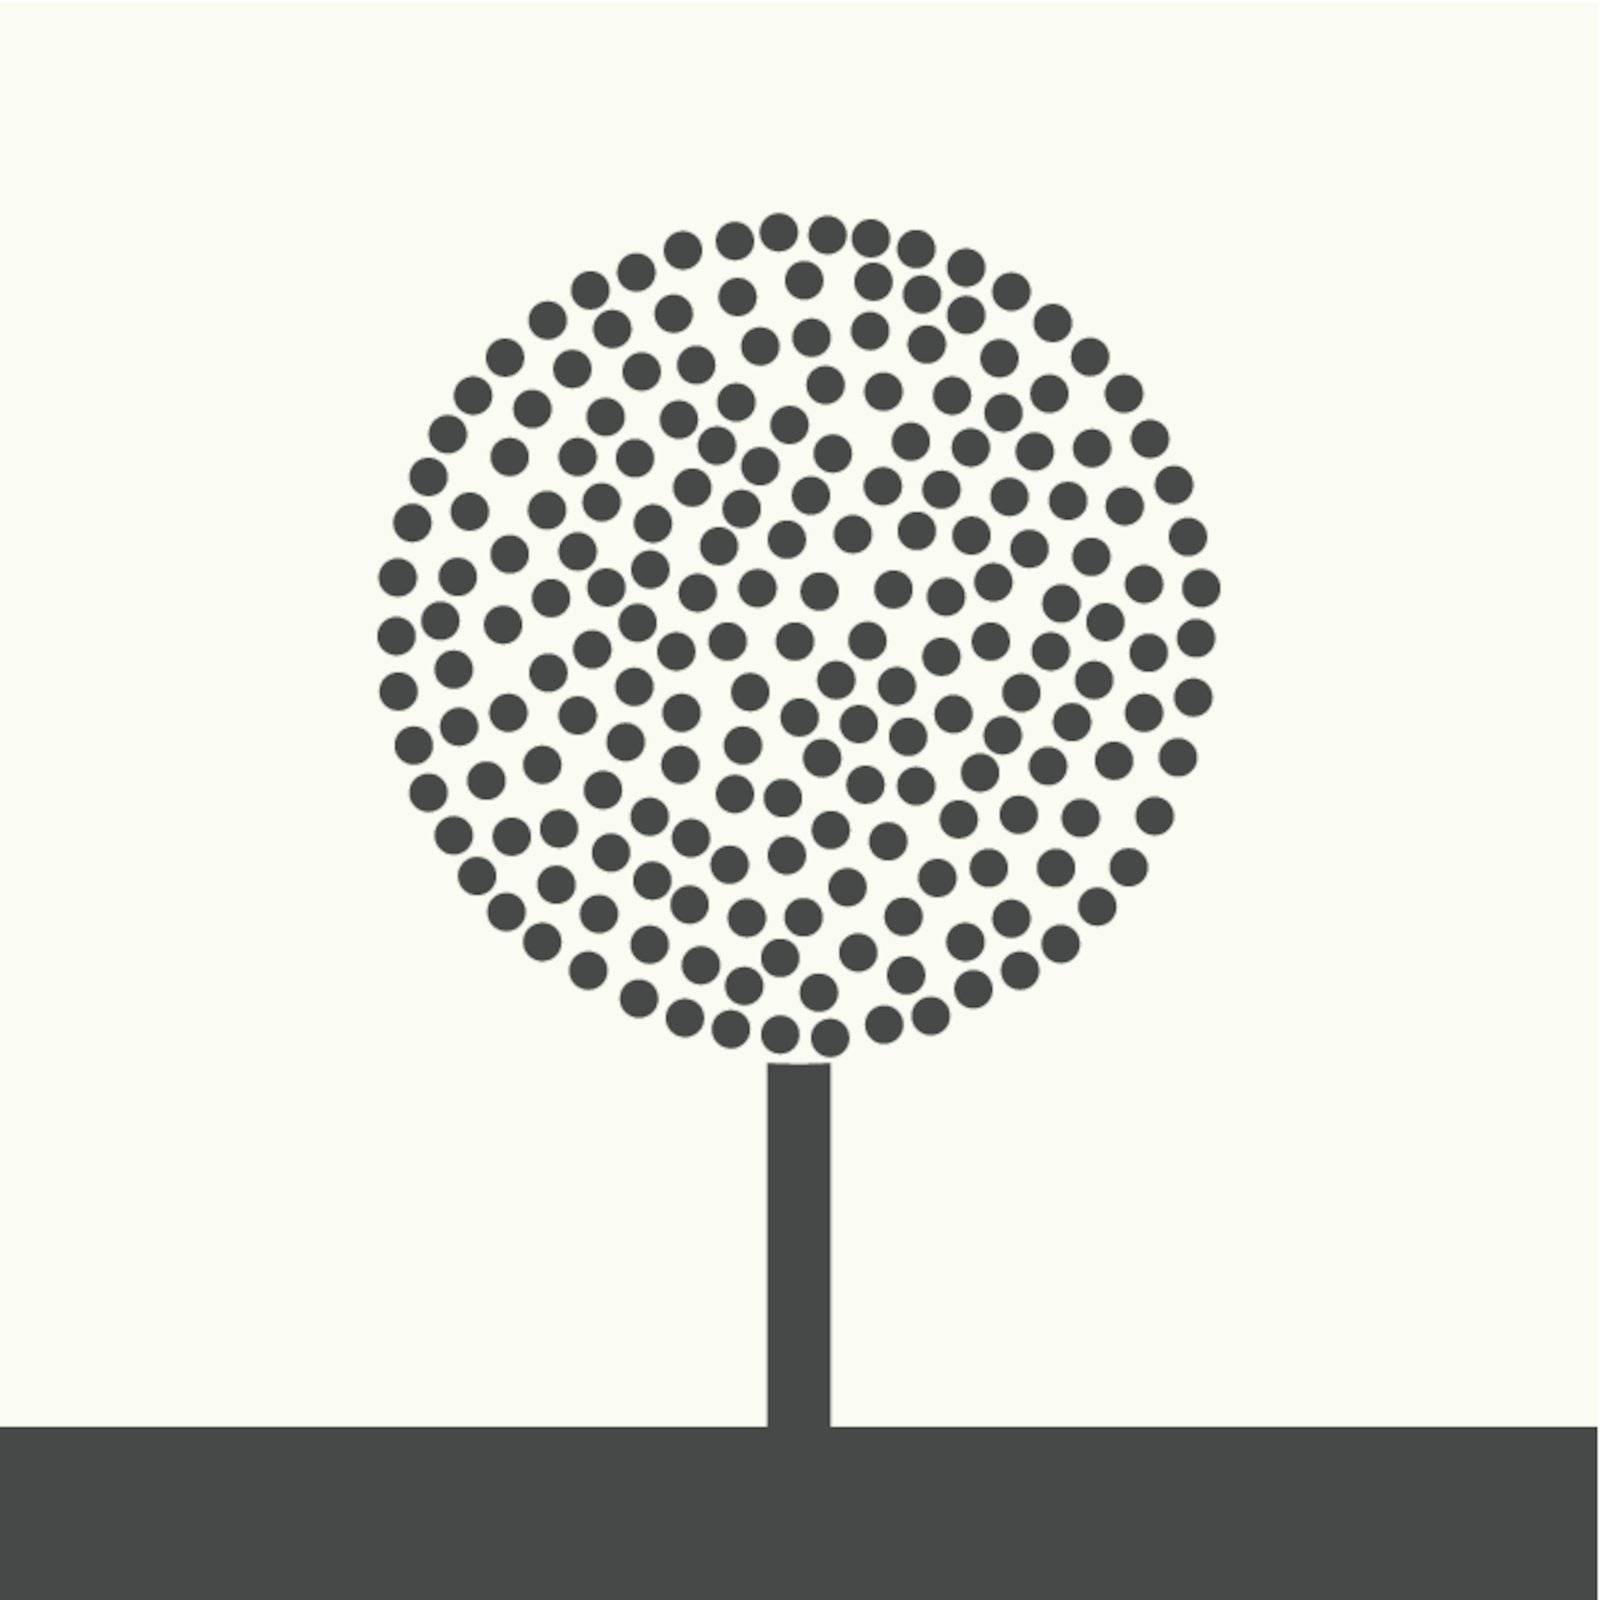 Round tree from balls. A vector illustration